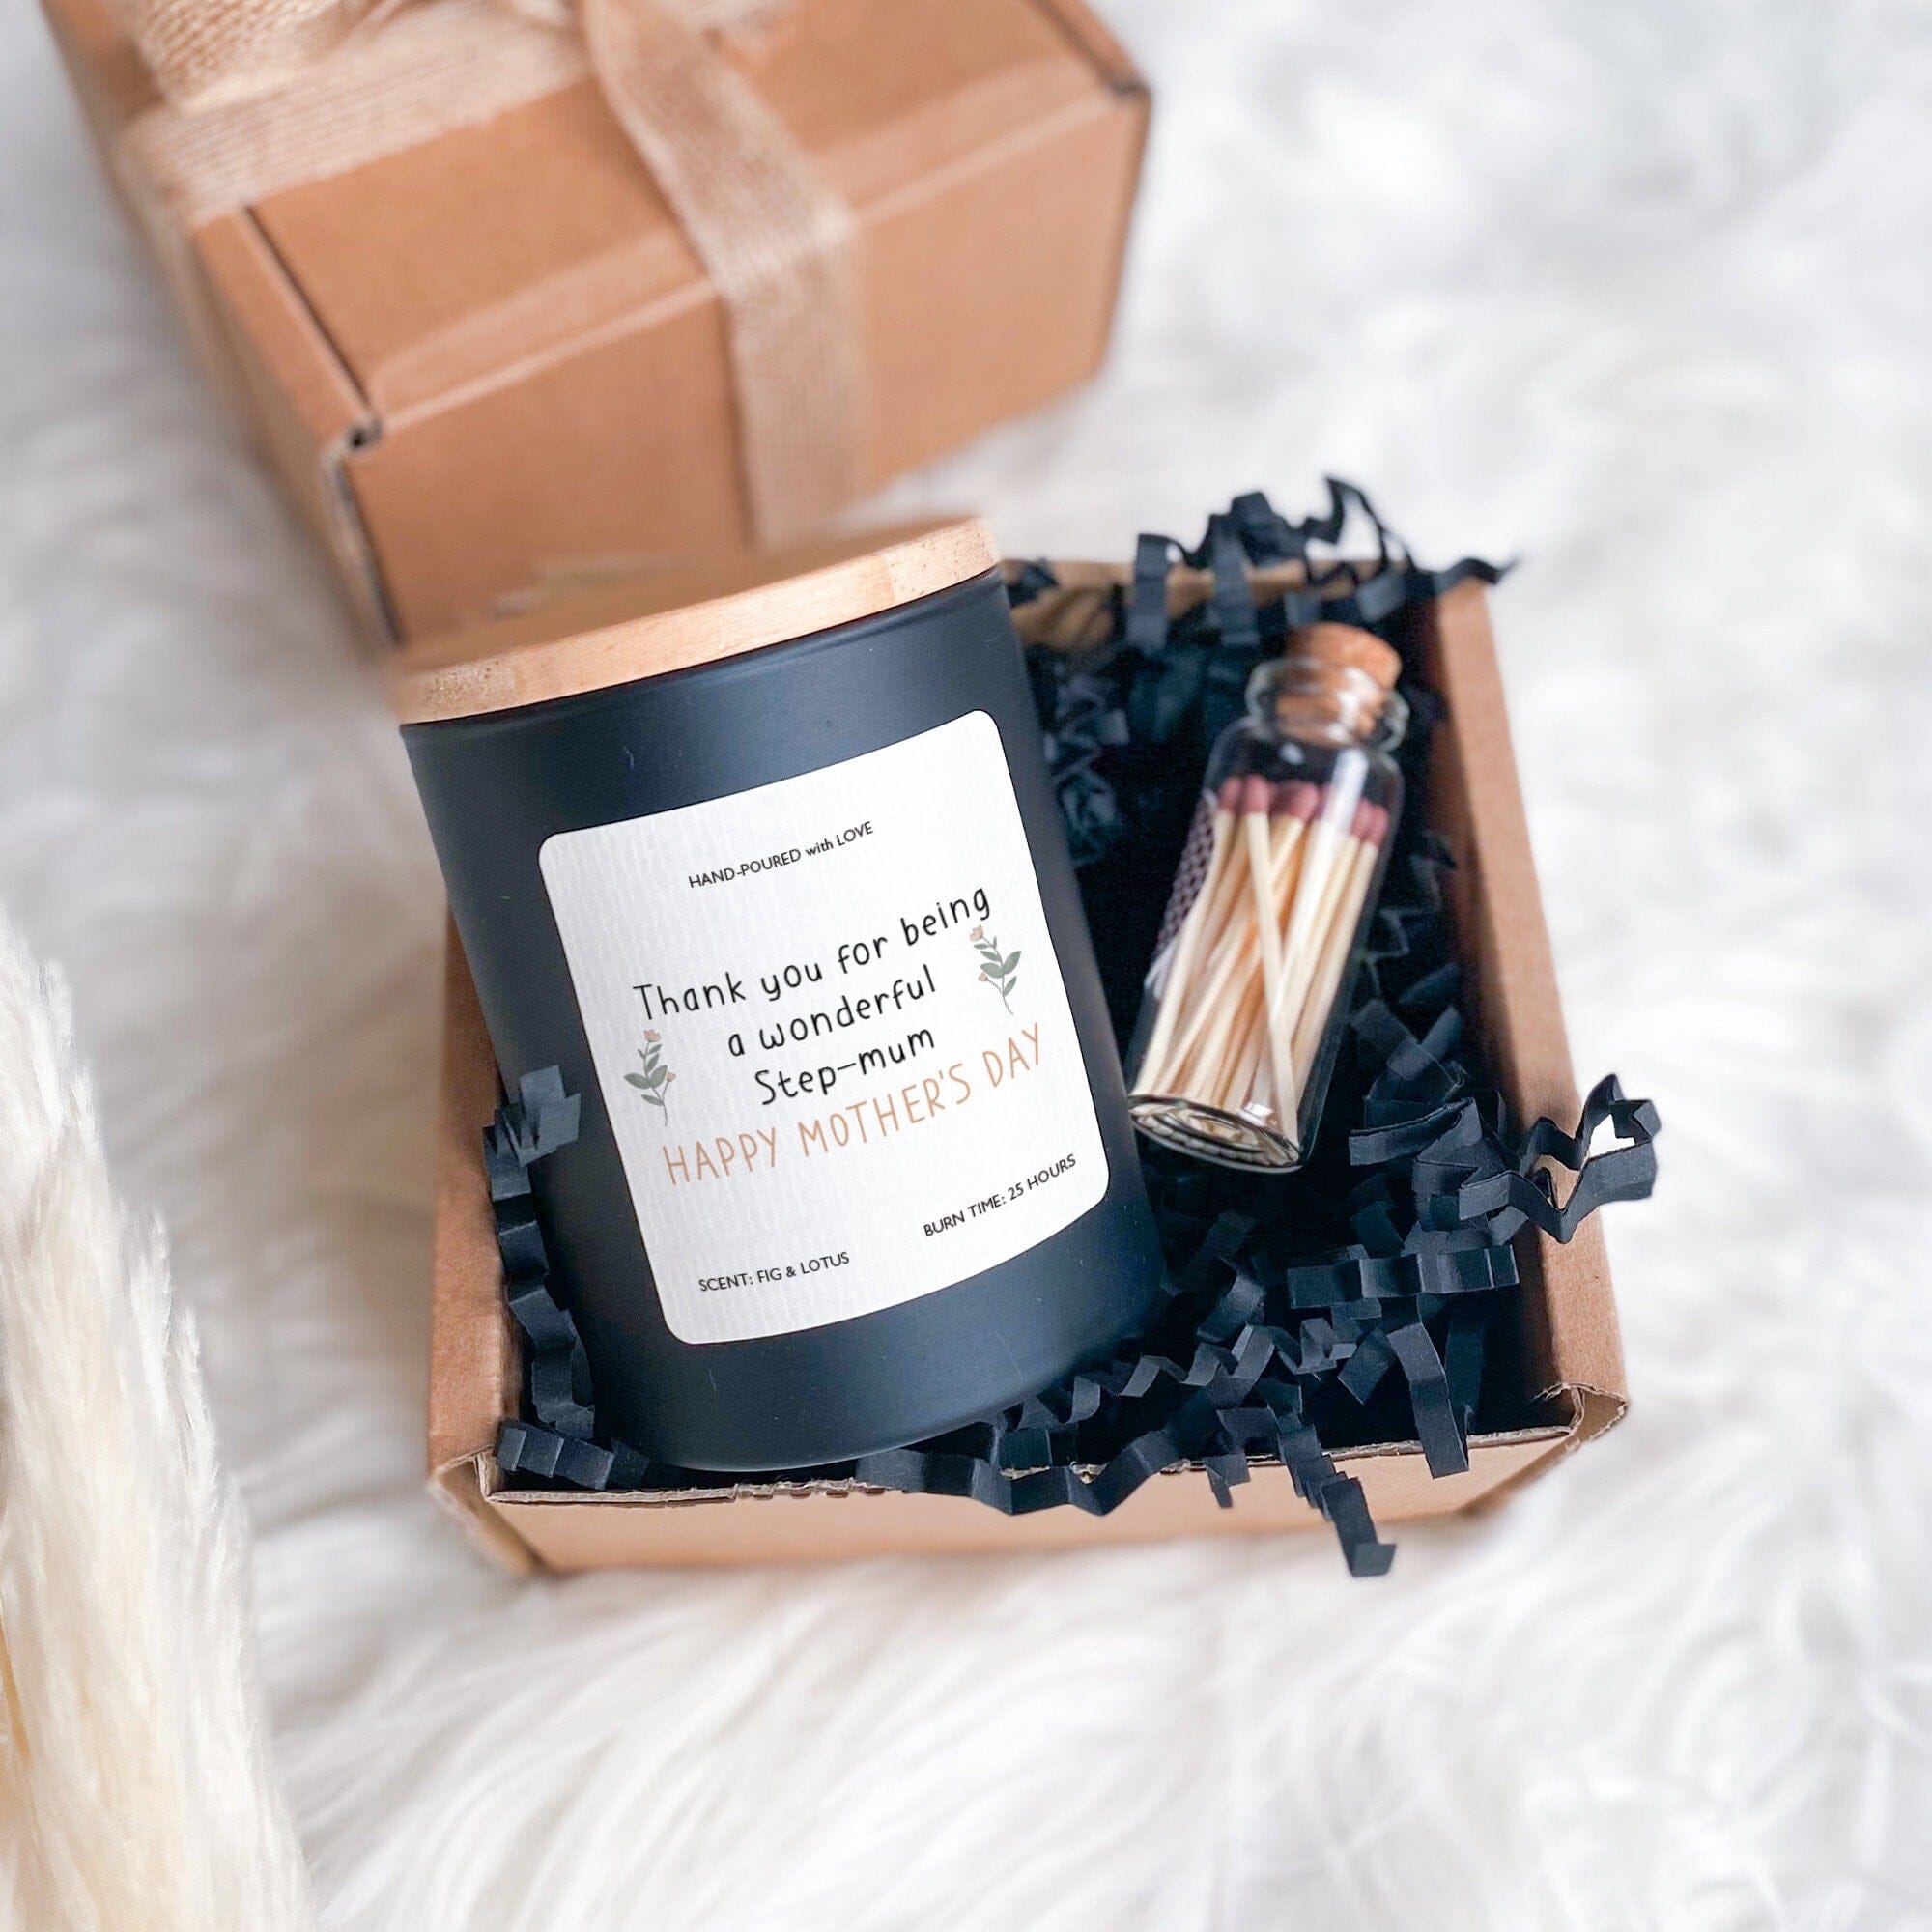 Thank You For Being A Wonderful Mother-In-Law Scented Soy Wax Vegan Candle Mother's Day Gift For Step-Mum